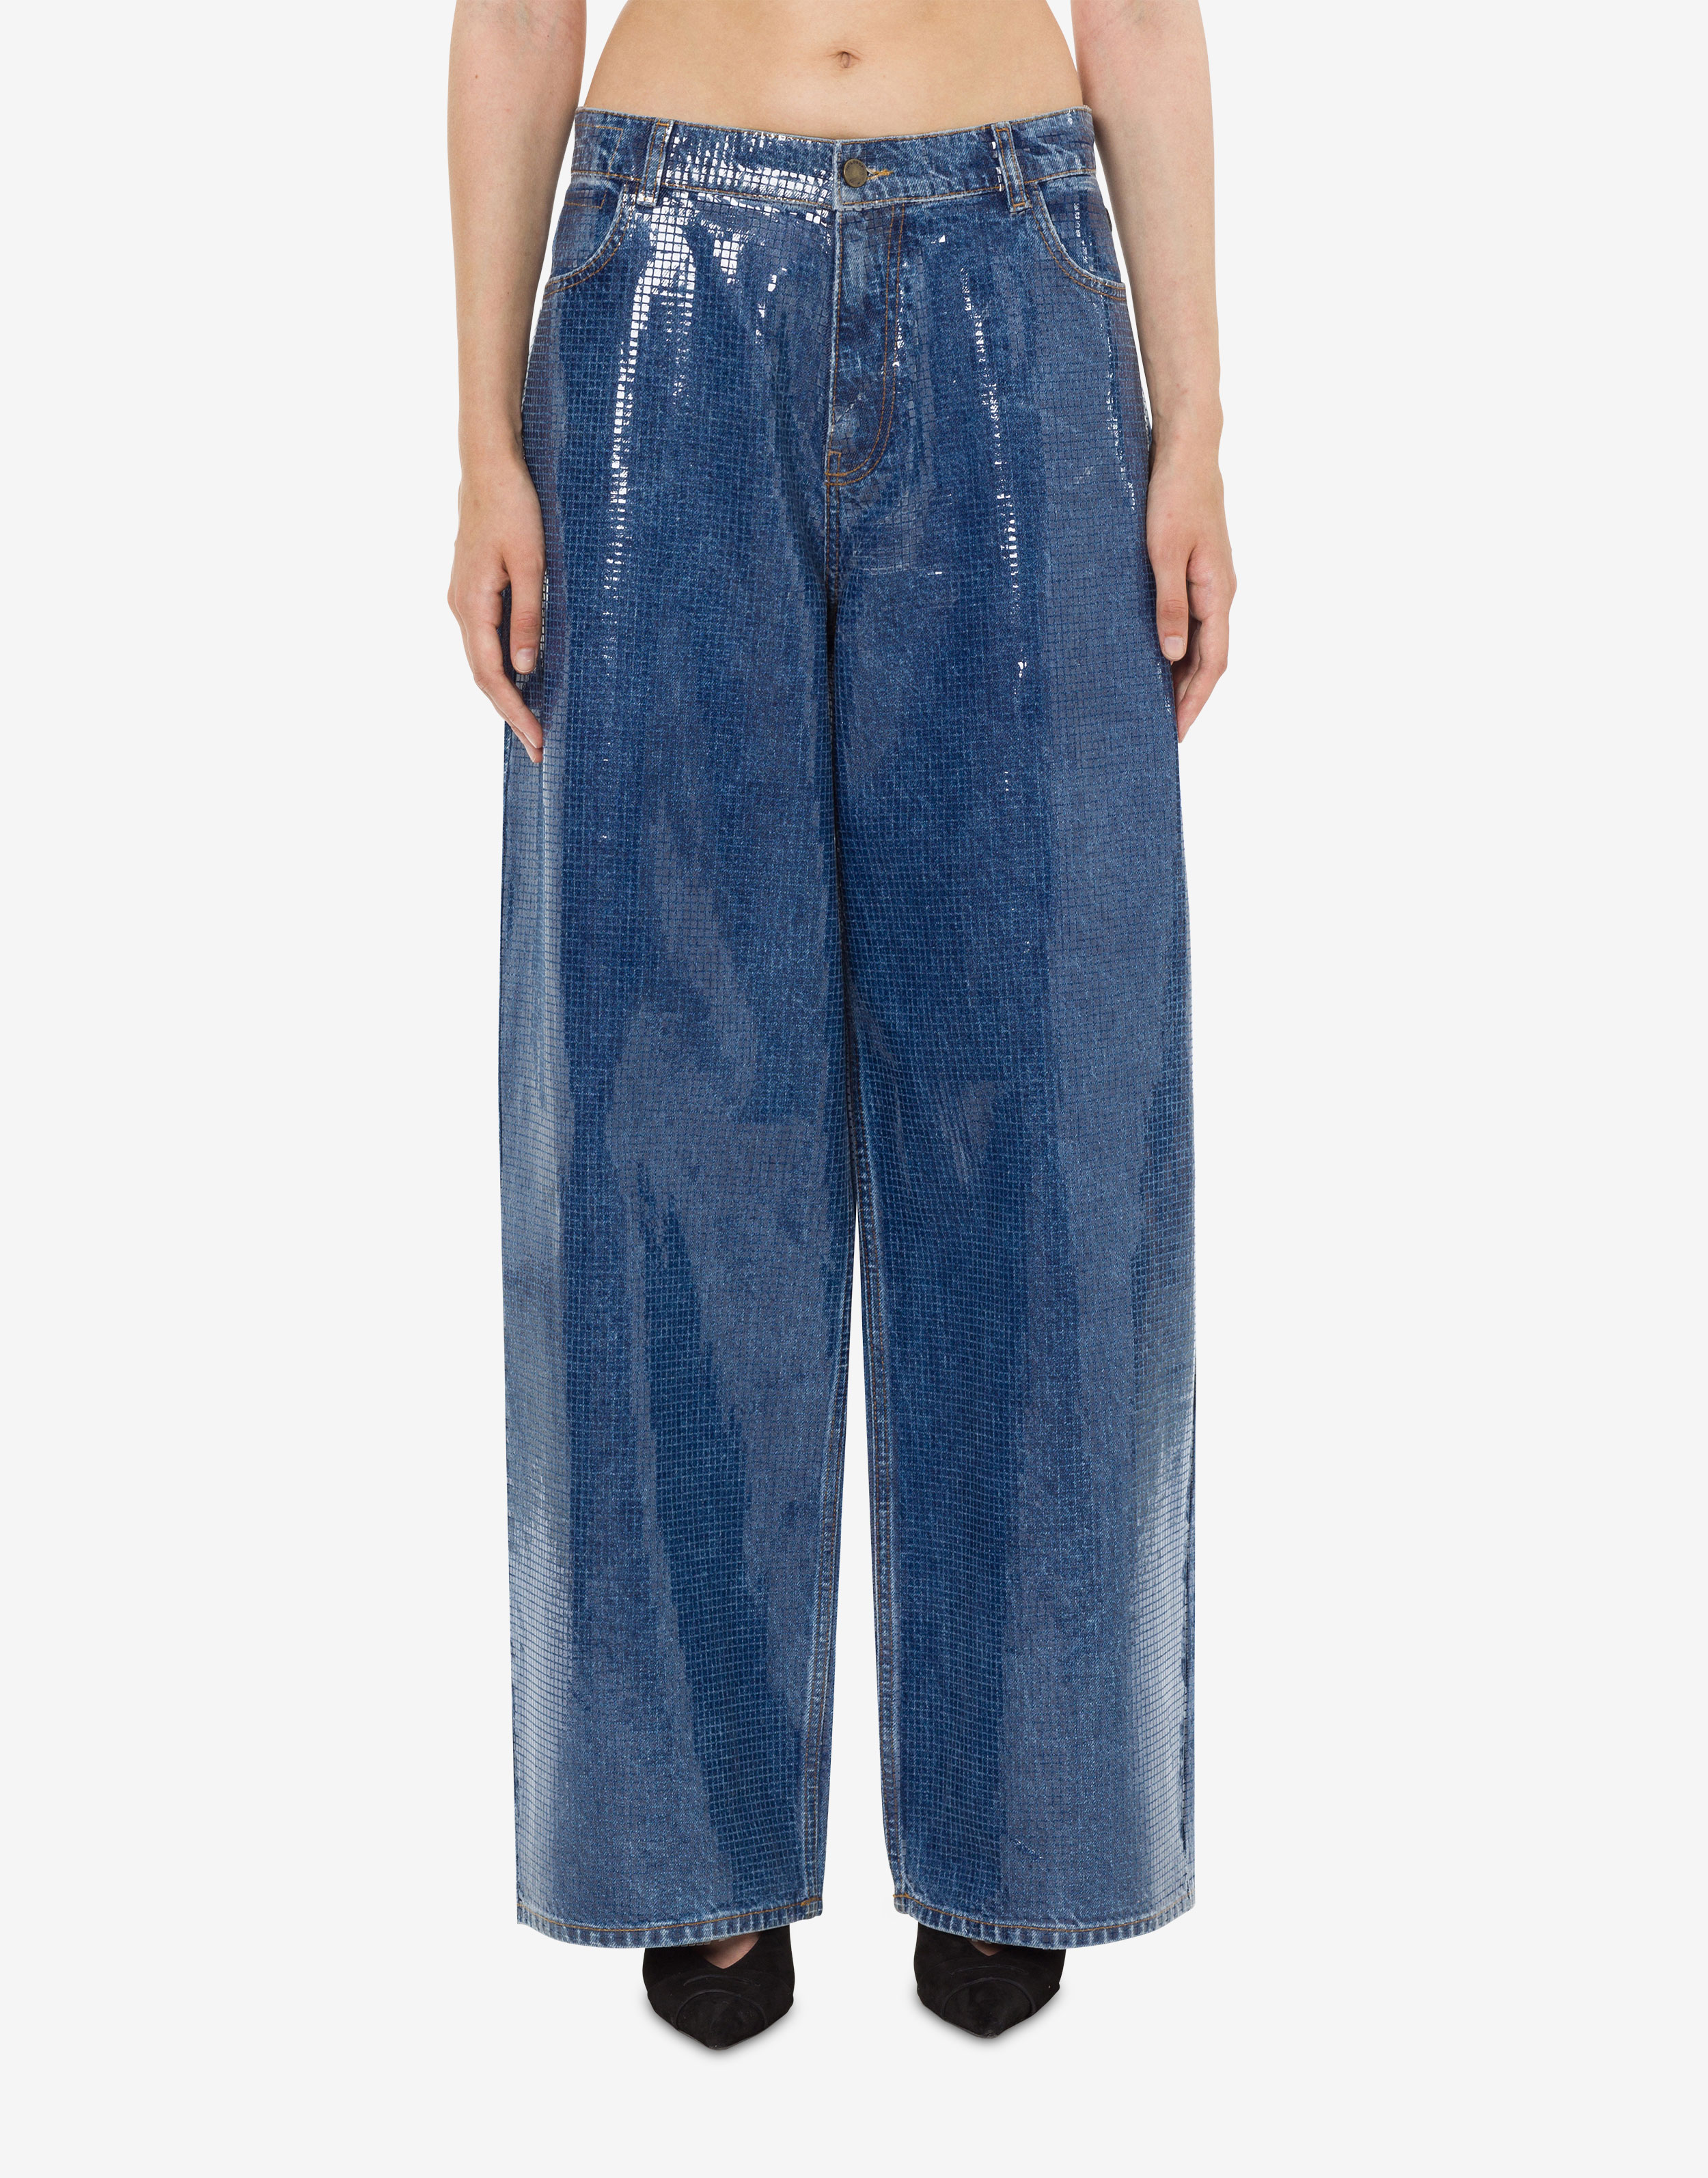 Oversized denim trousers with sequins